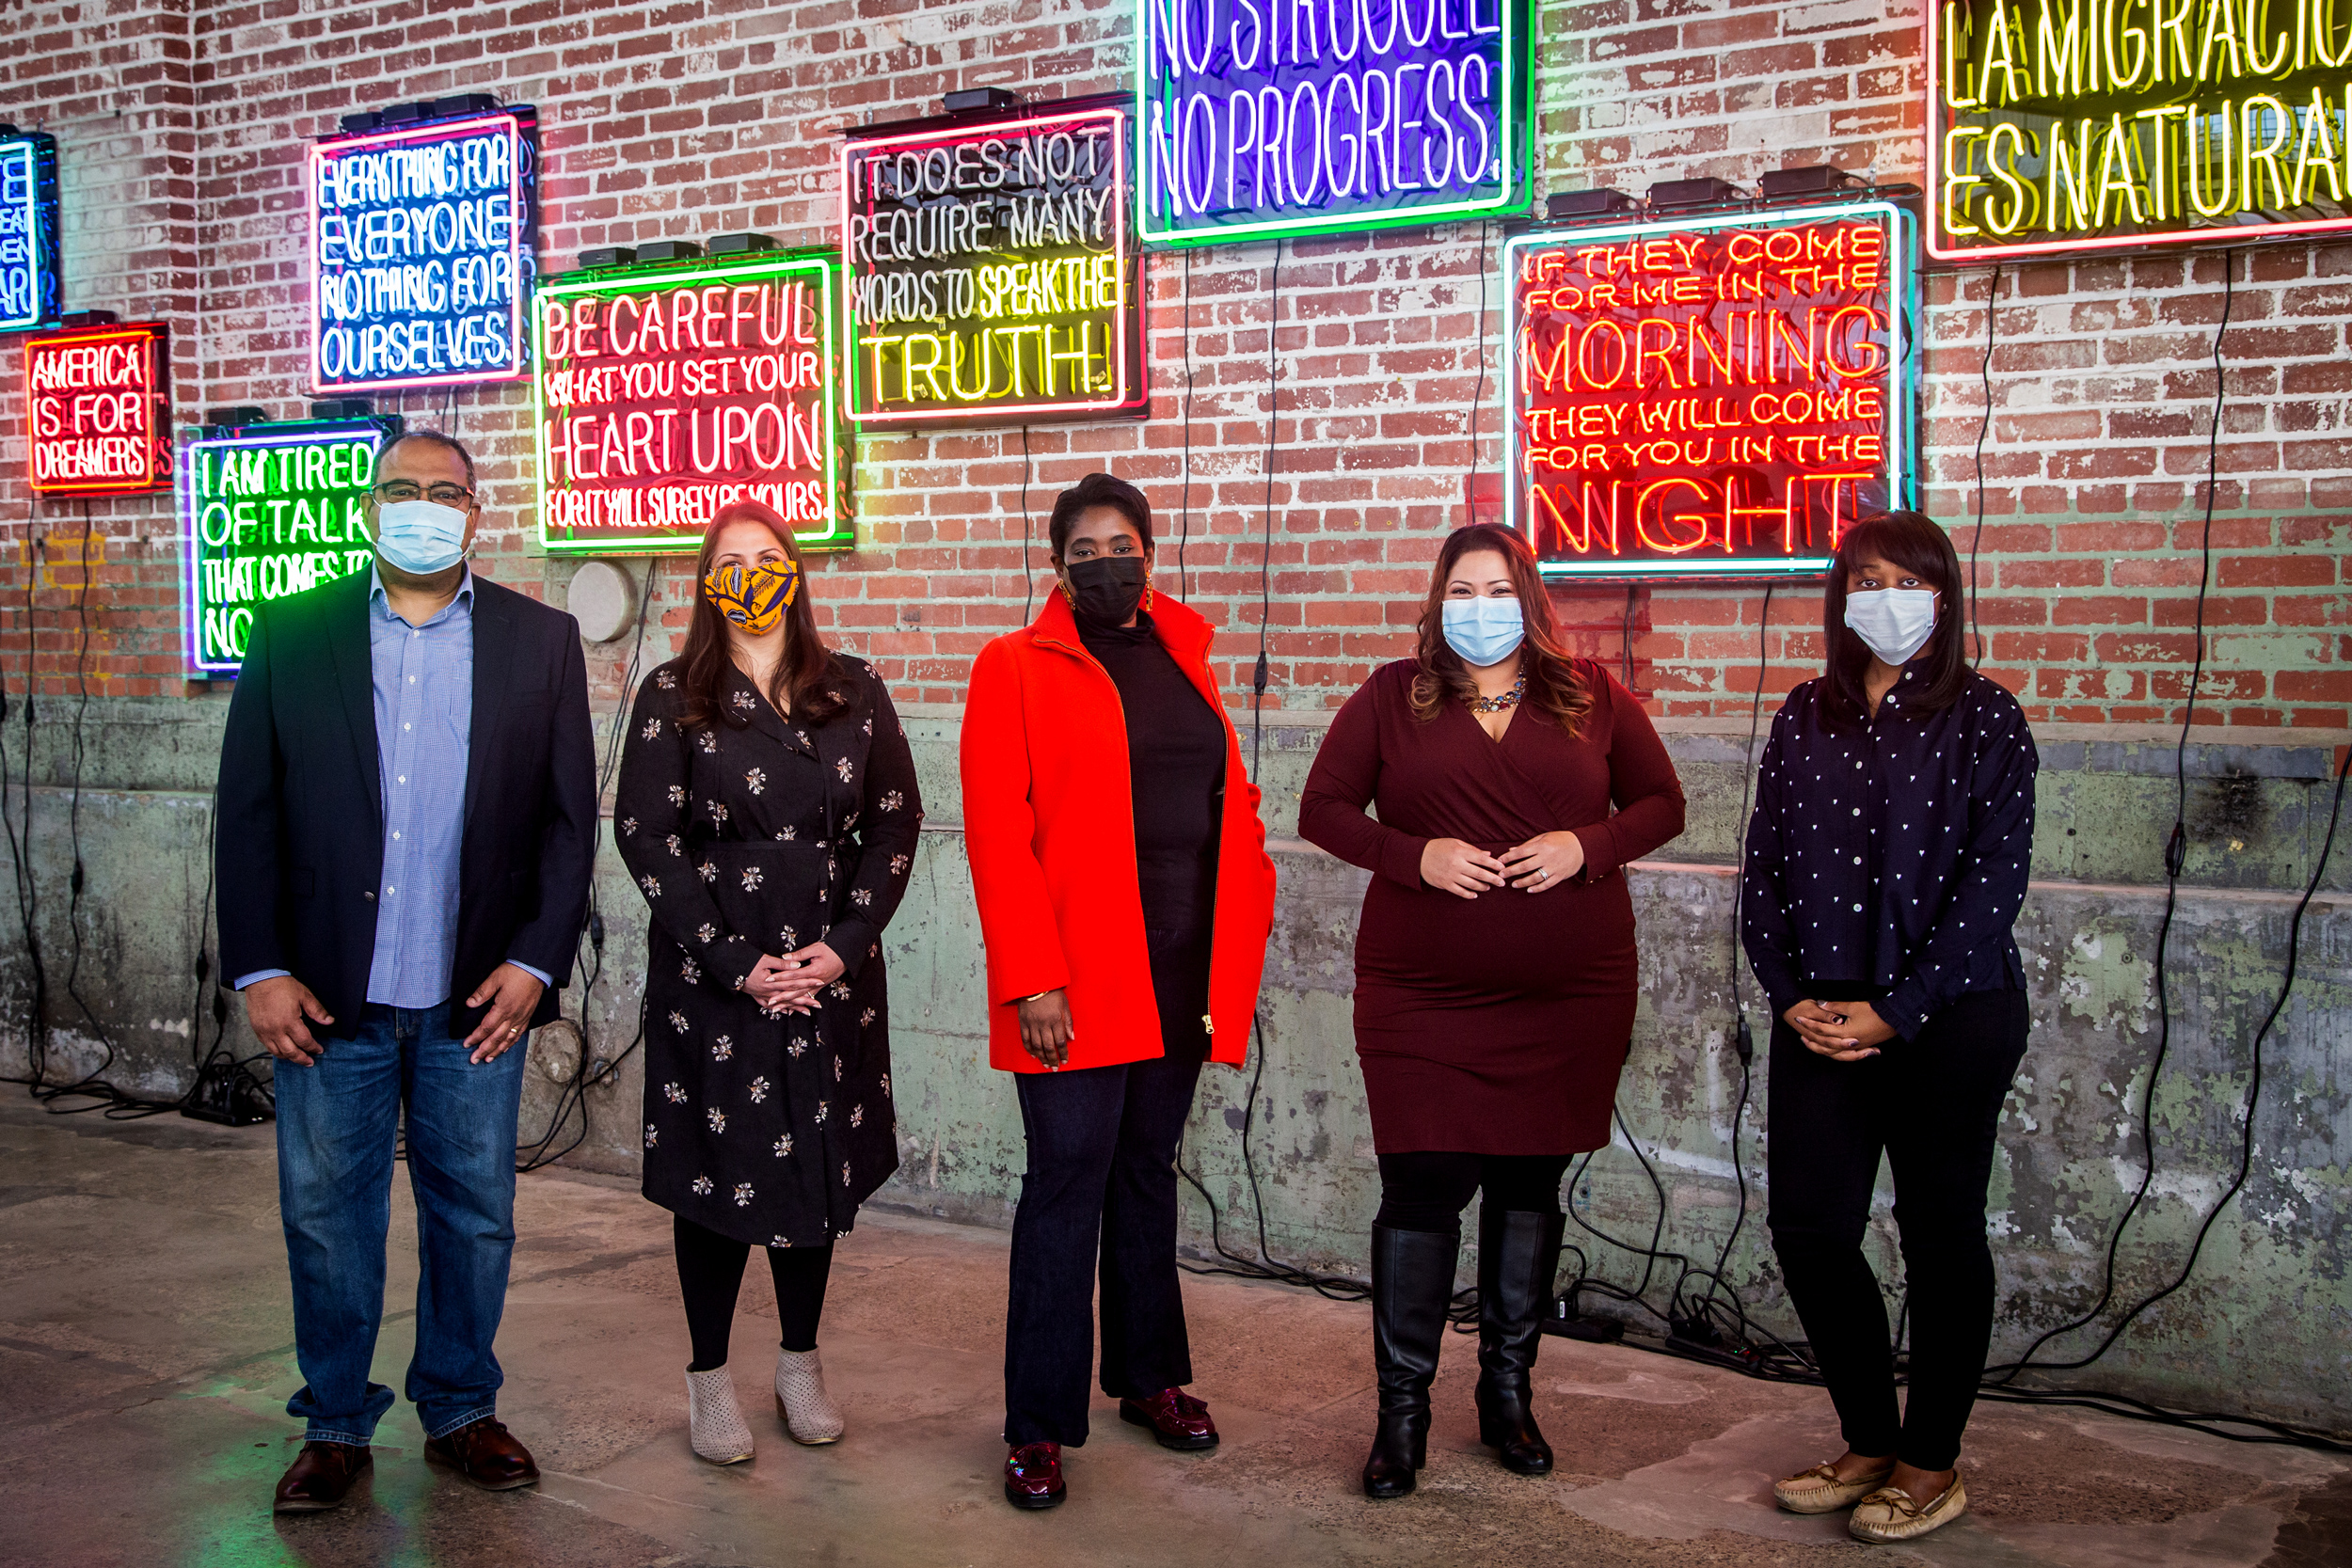 group of people with masks on standing in front of LED signs hanging on the brick wall